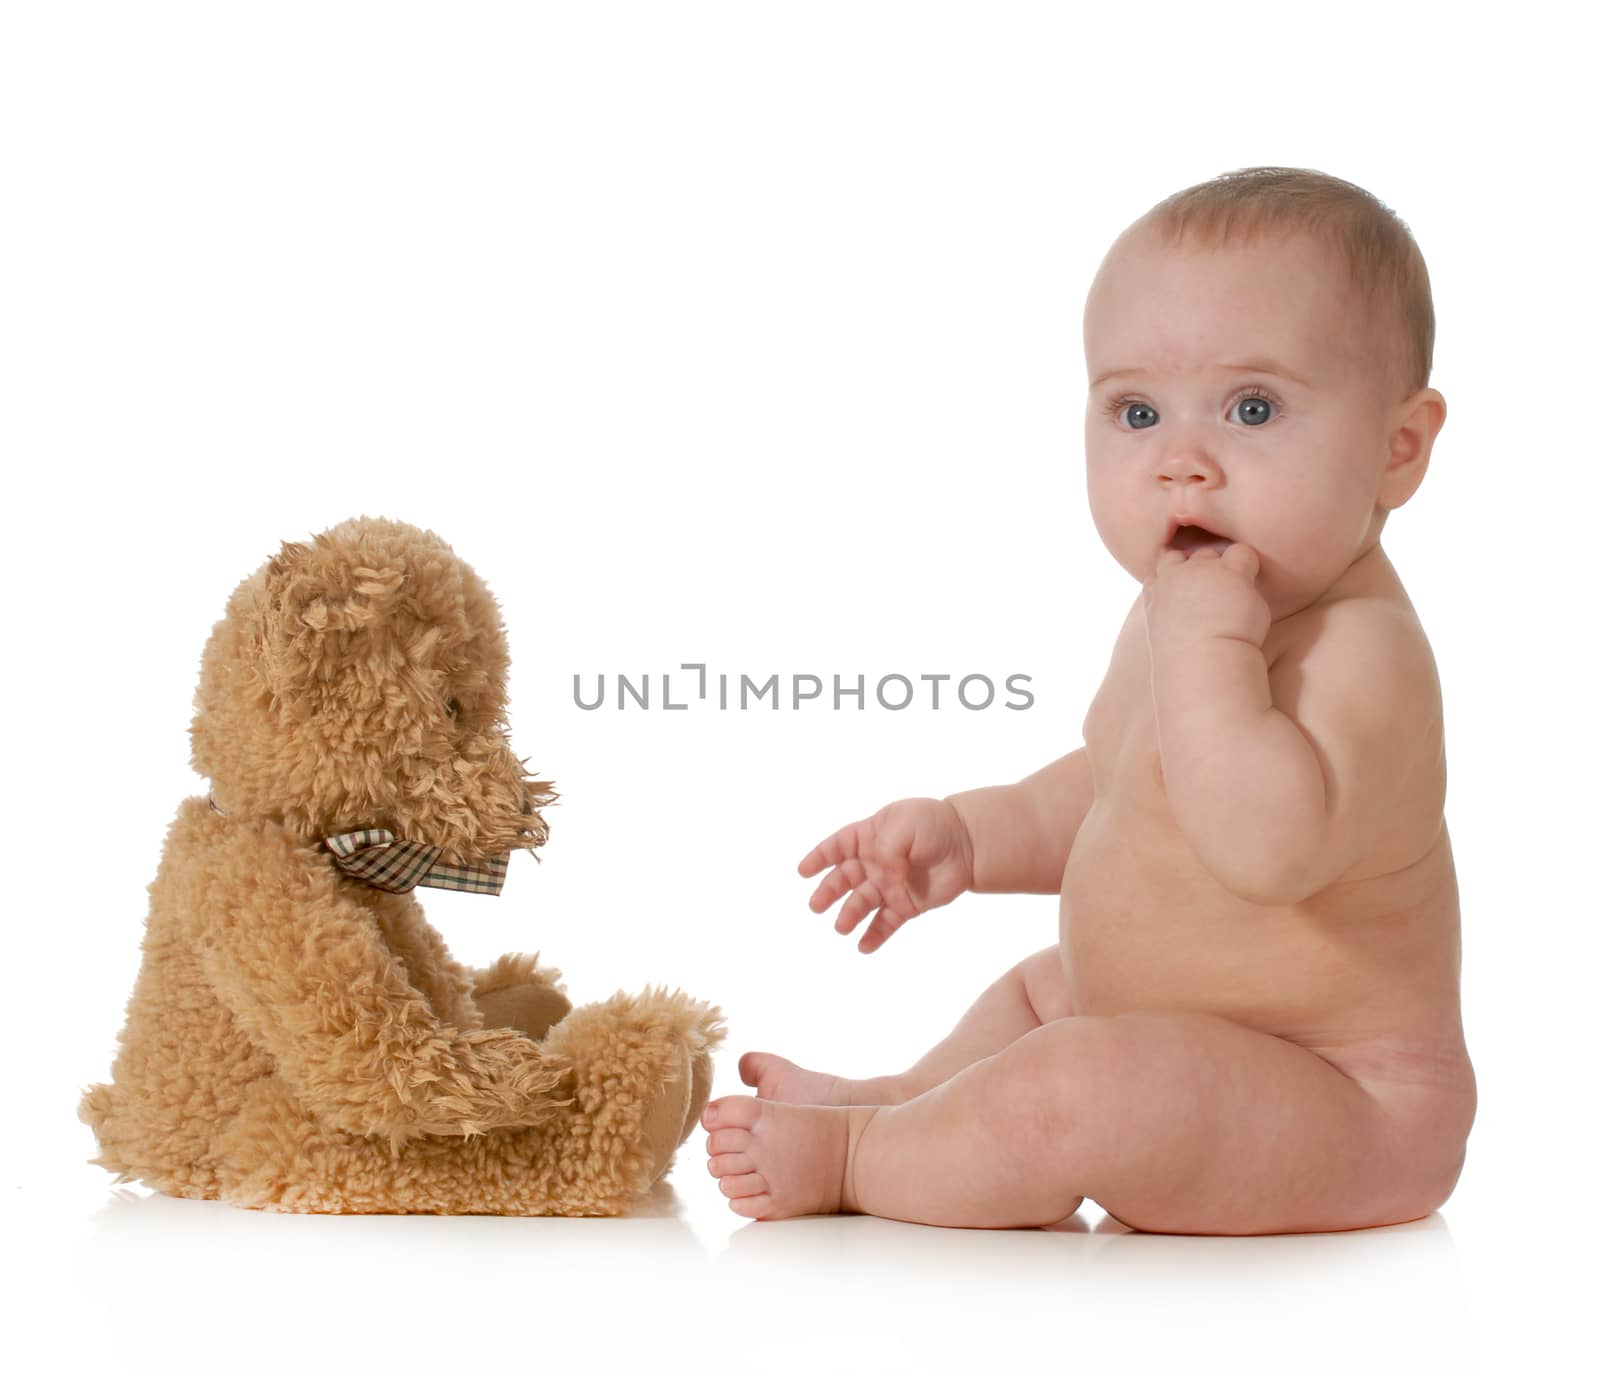 baby and teddy bear by willeecole123